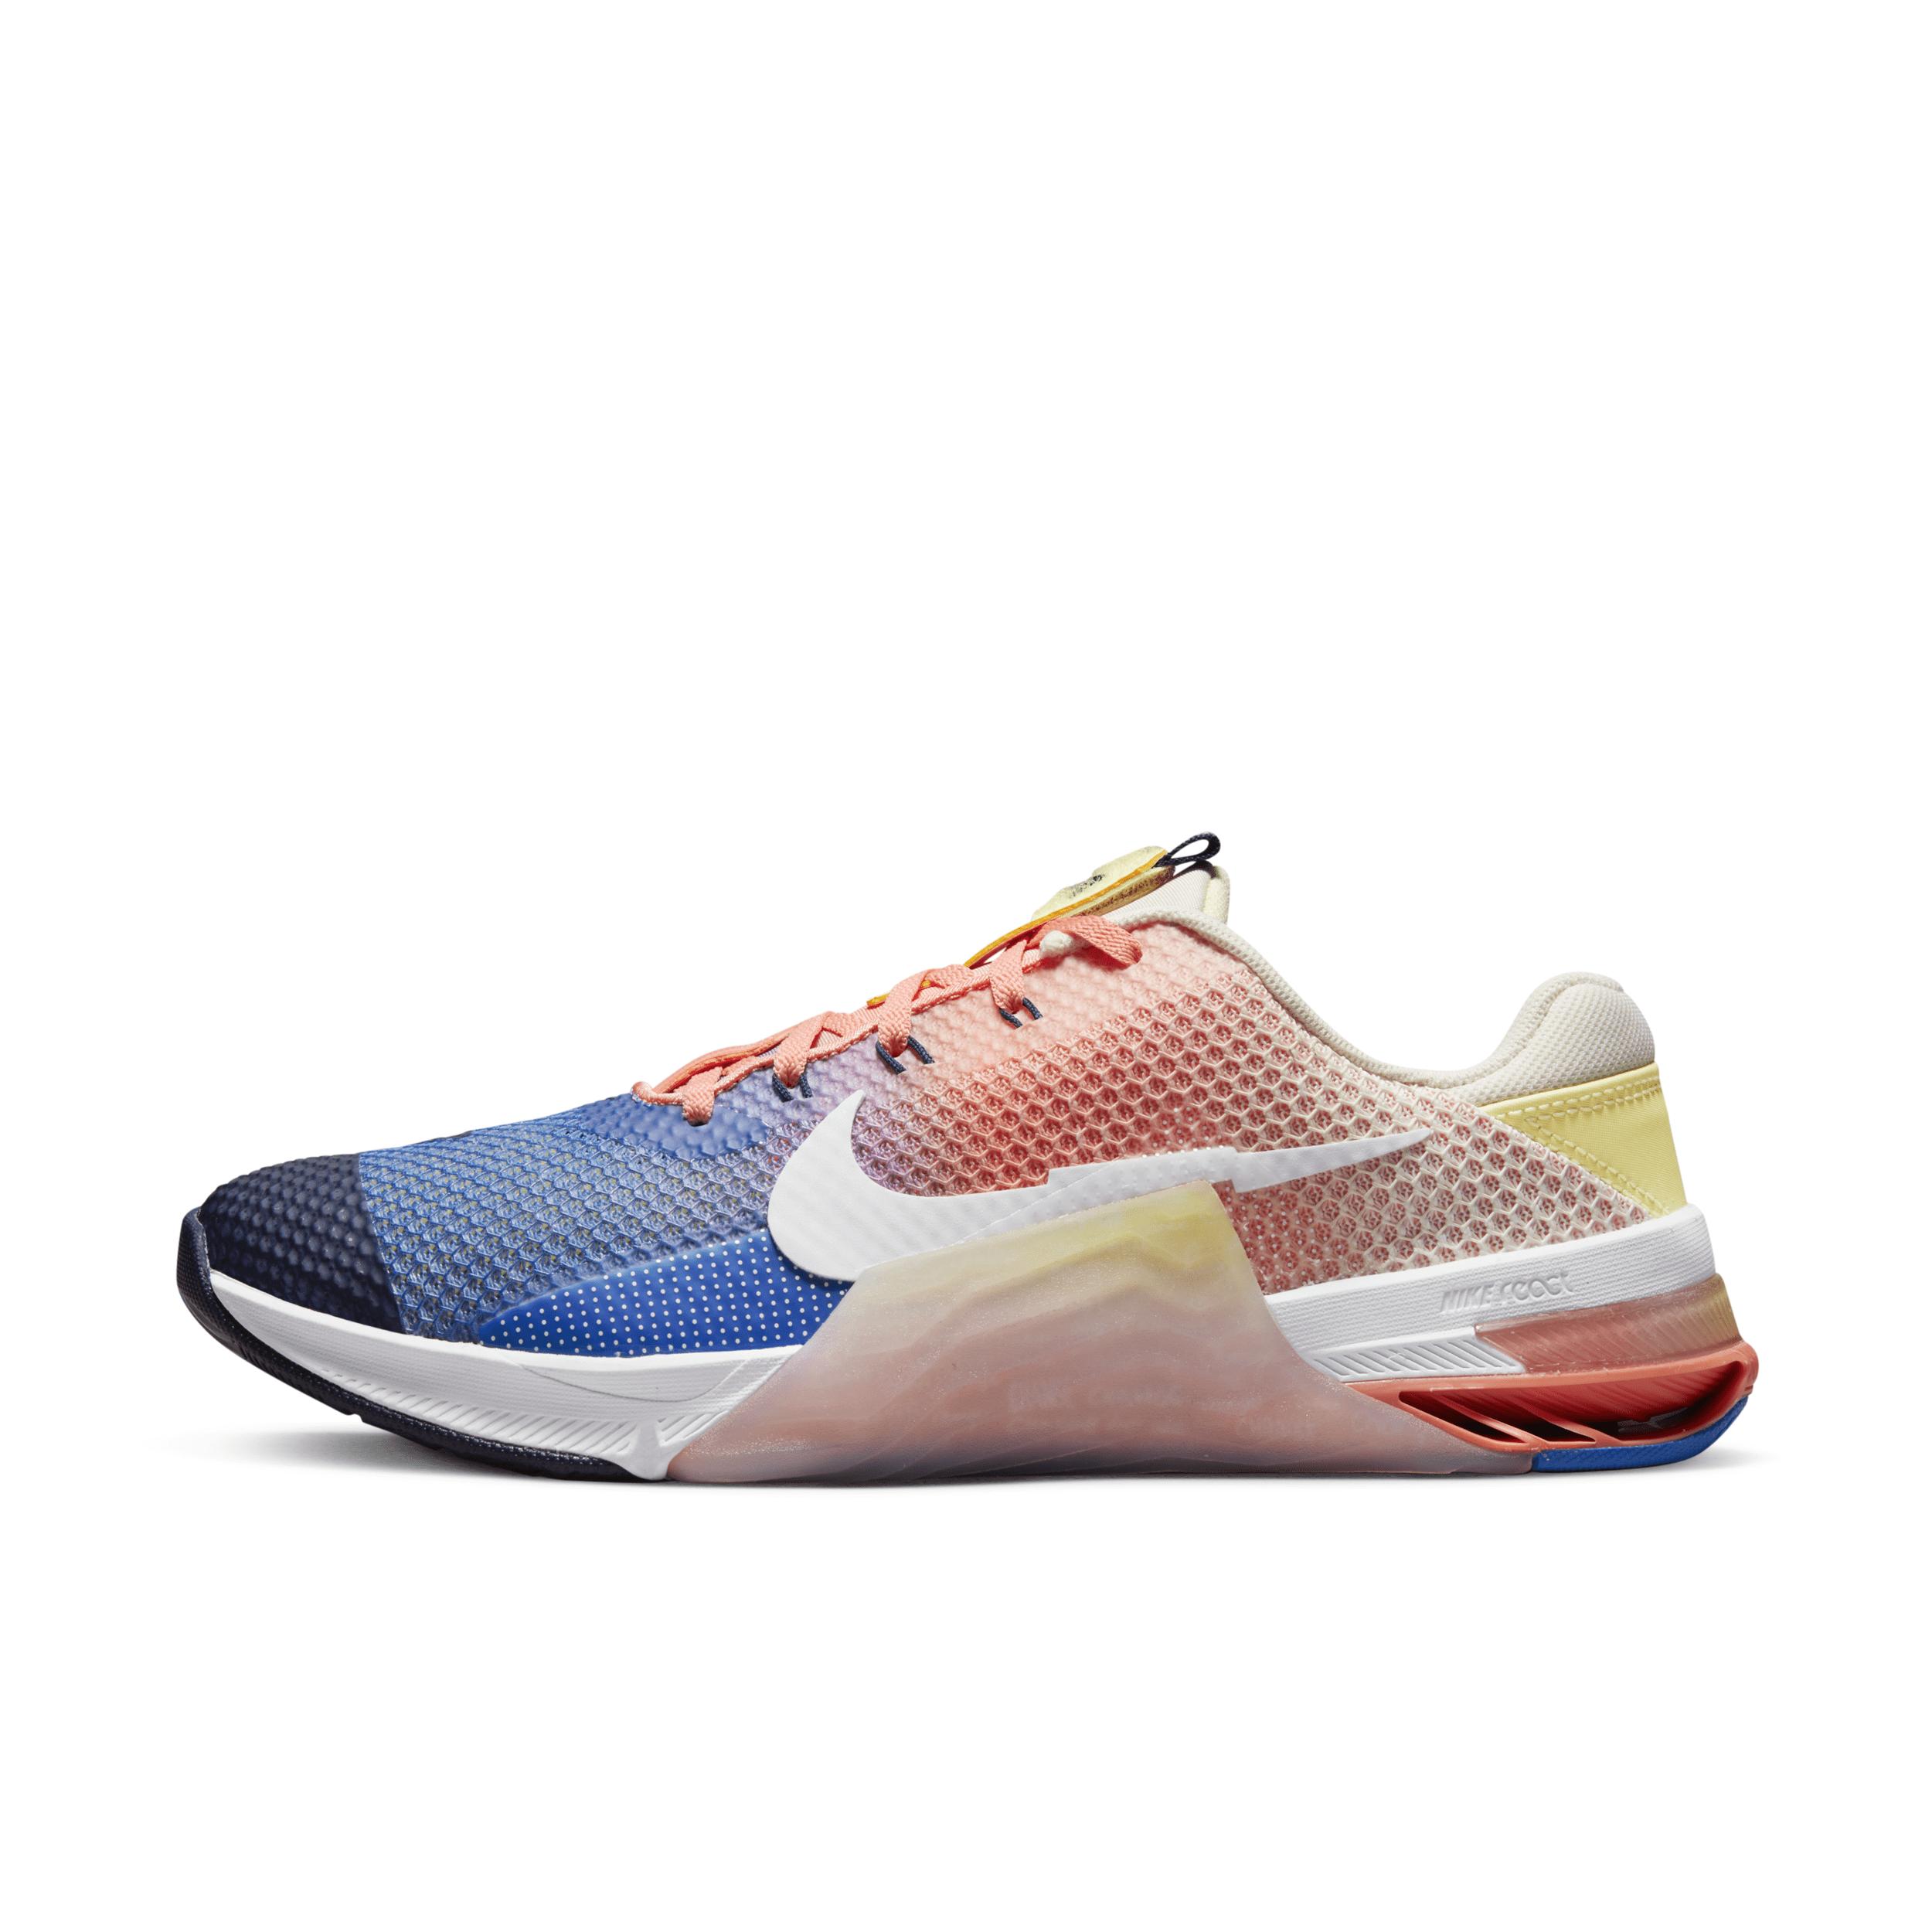 Nike Metcon 7 Amp Training Shoes Multi-colour | Lyst